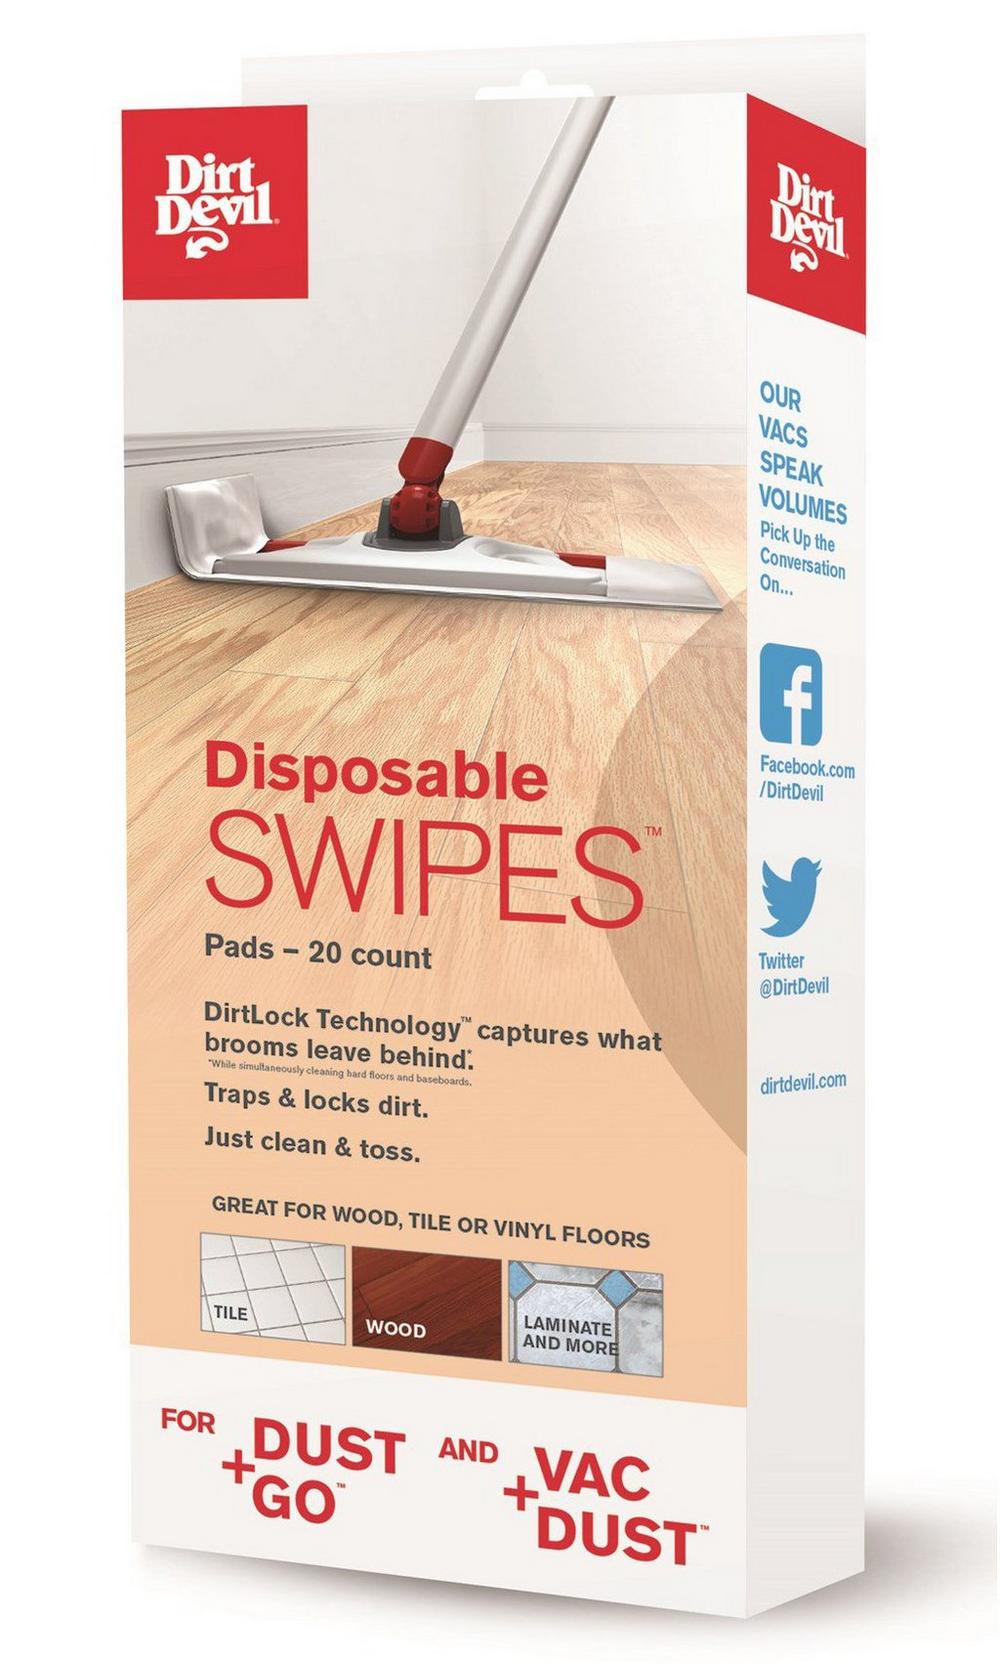 Dirt Devil Disposable Swipes for Dust + Go and Vac + Dust, Model